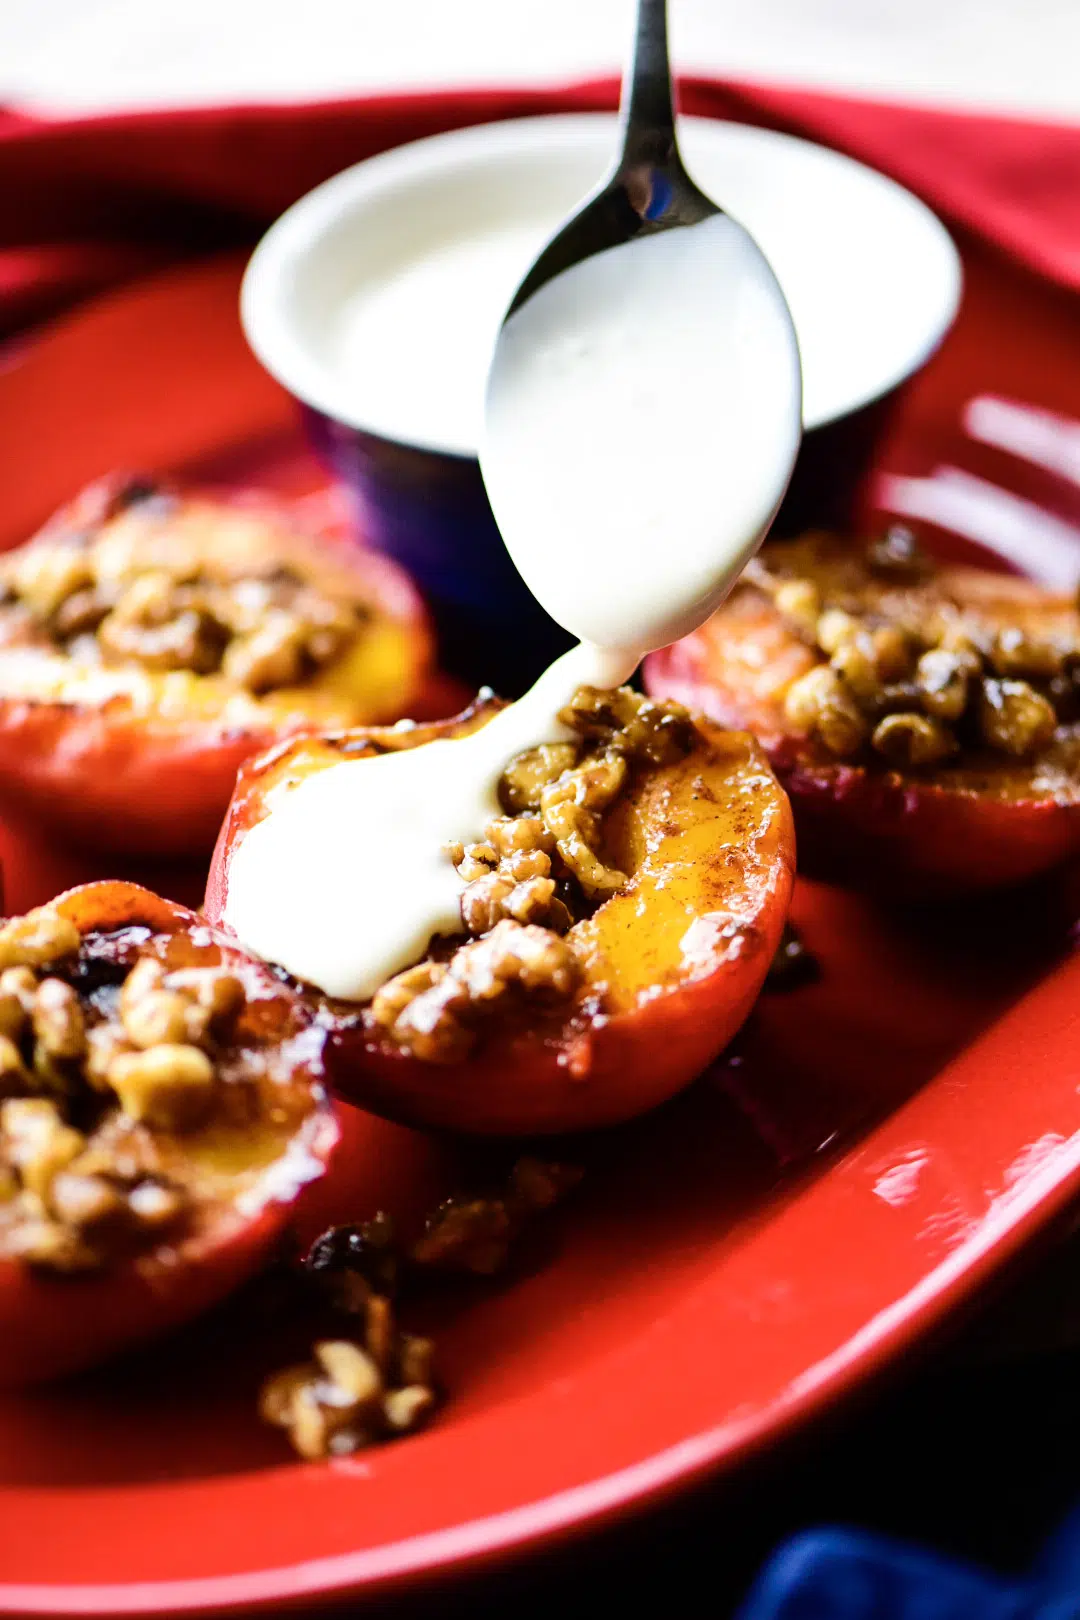 Grilled Peaches and Cream